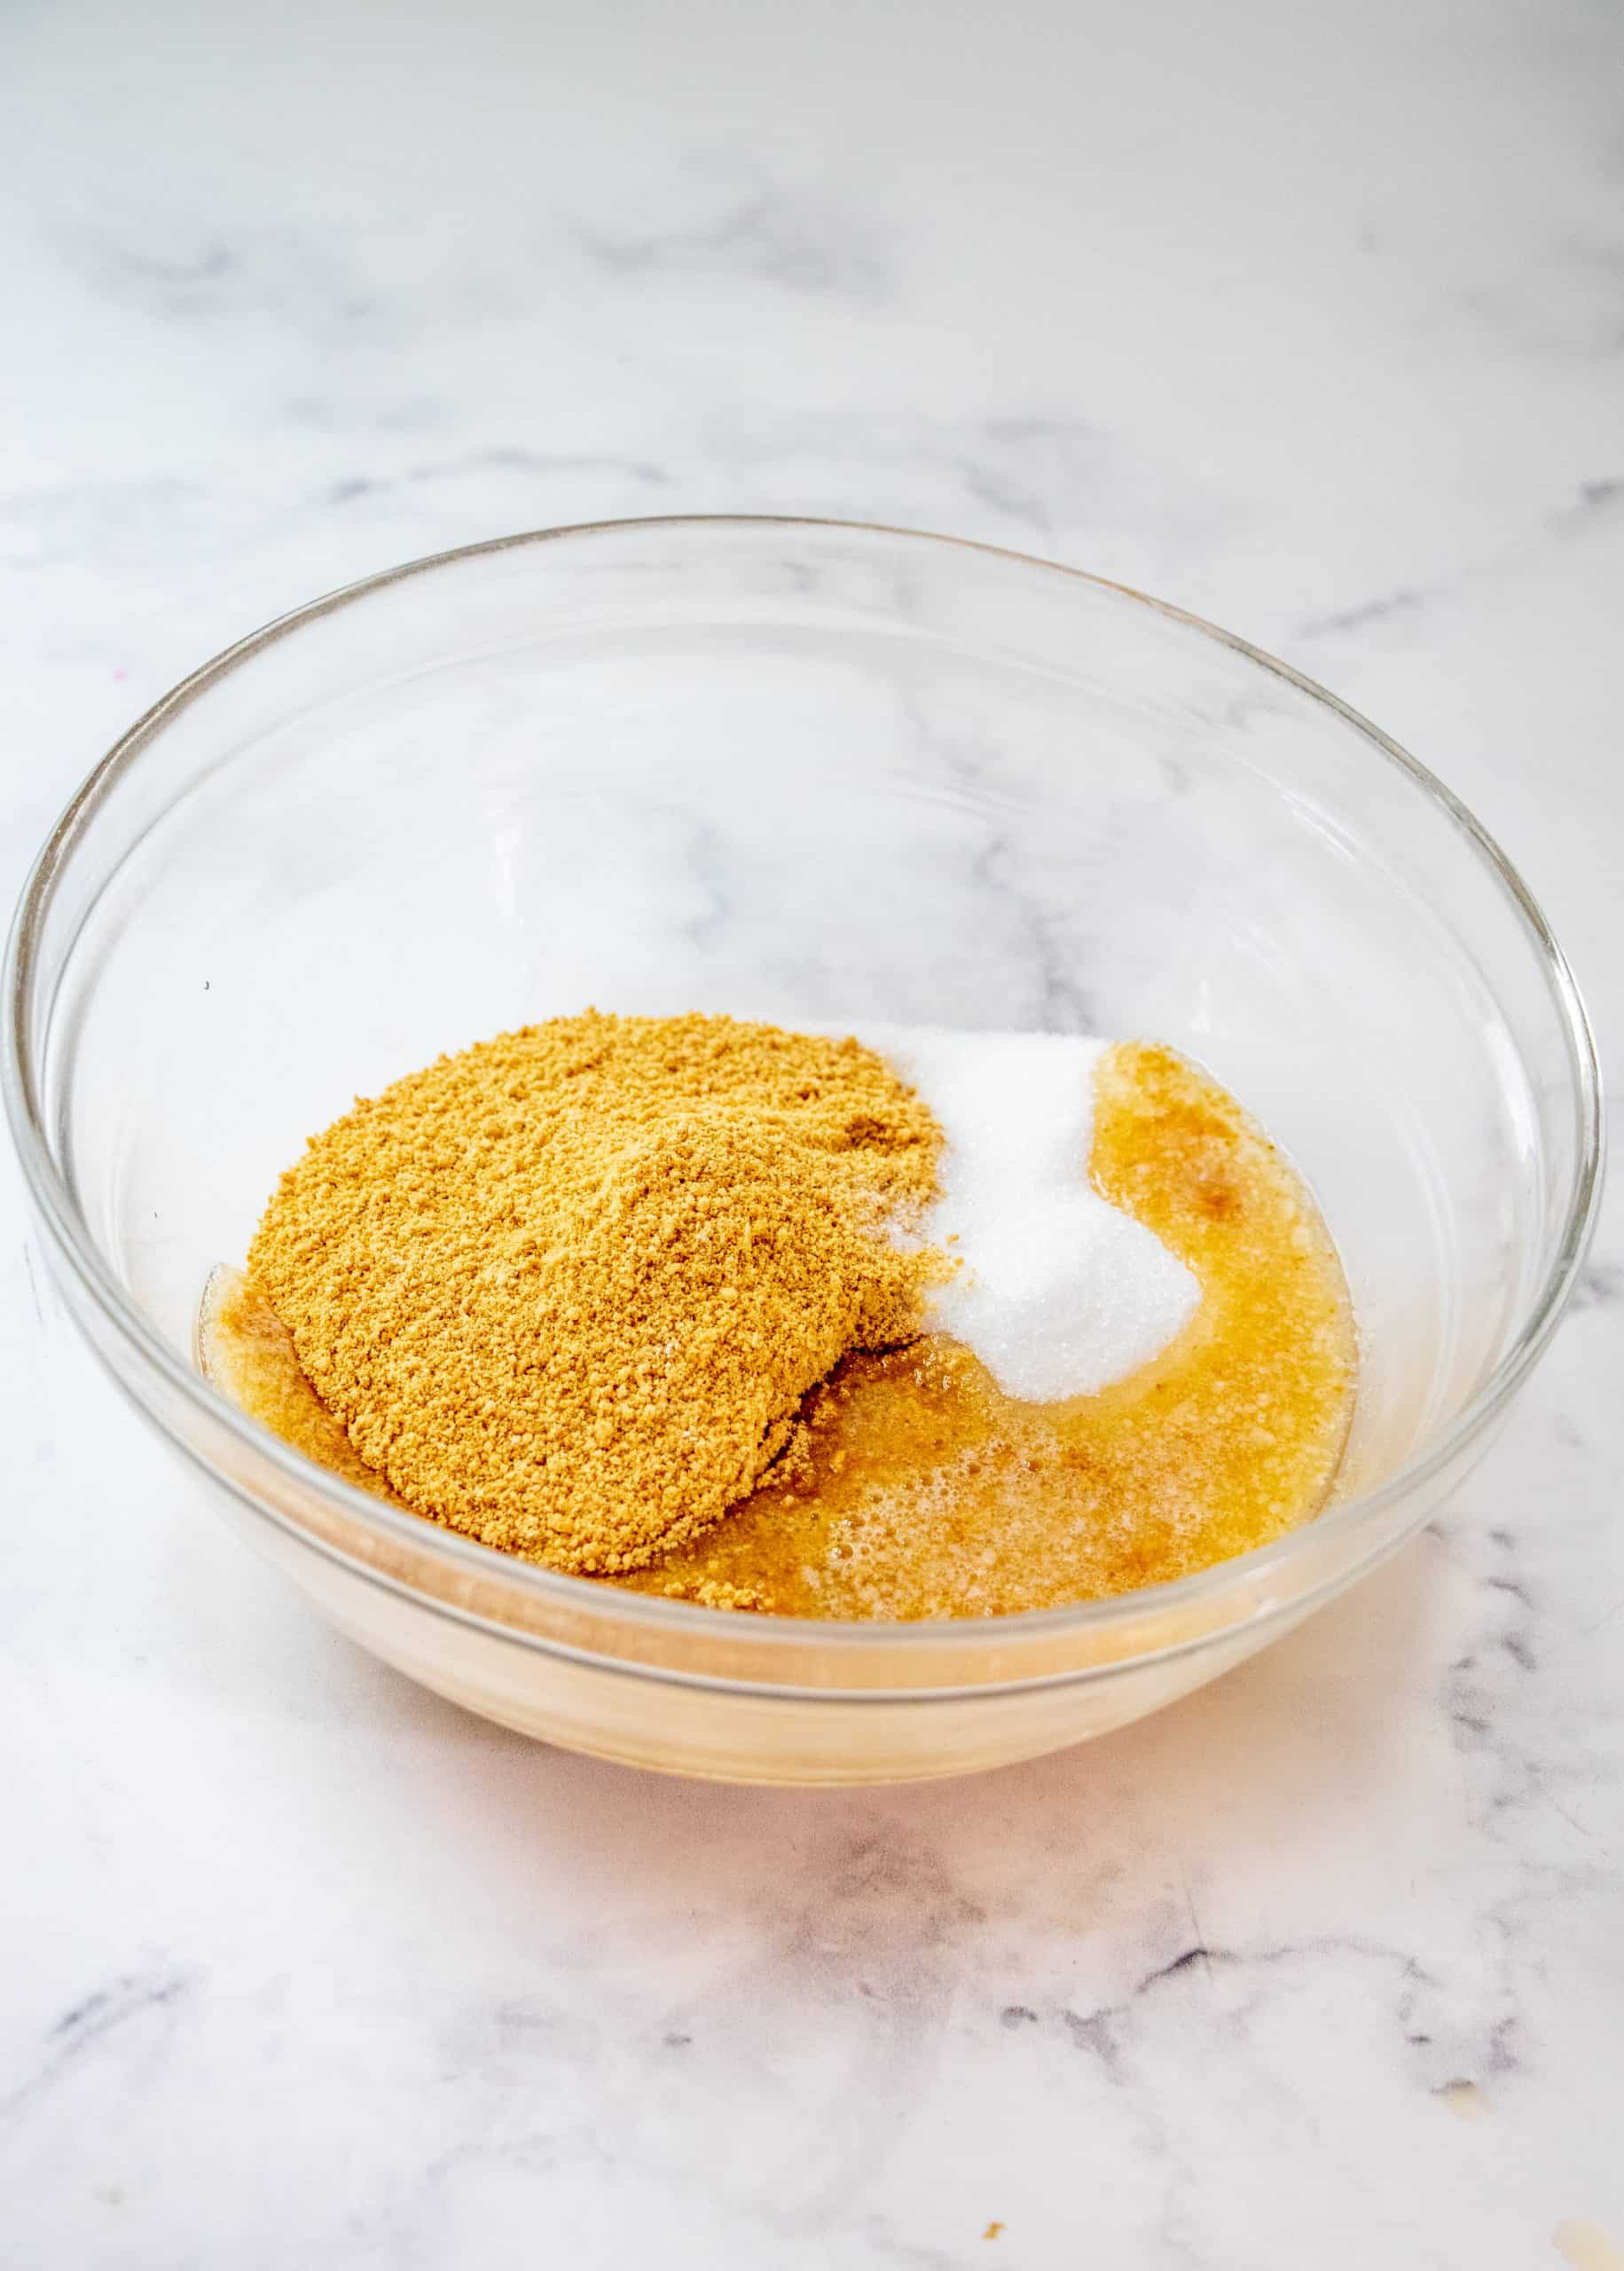 graham cracker crumbs, sugar and melted butter In a bowl.